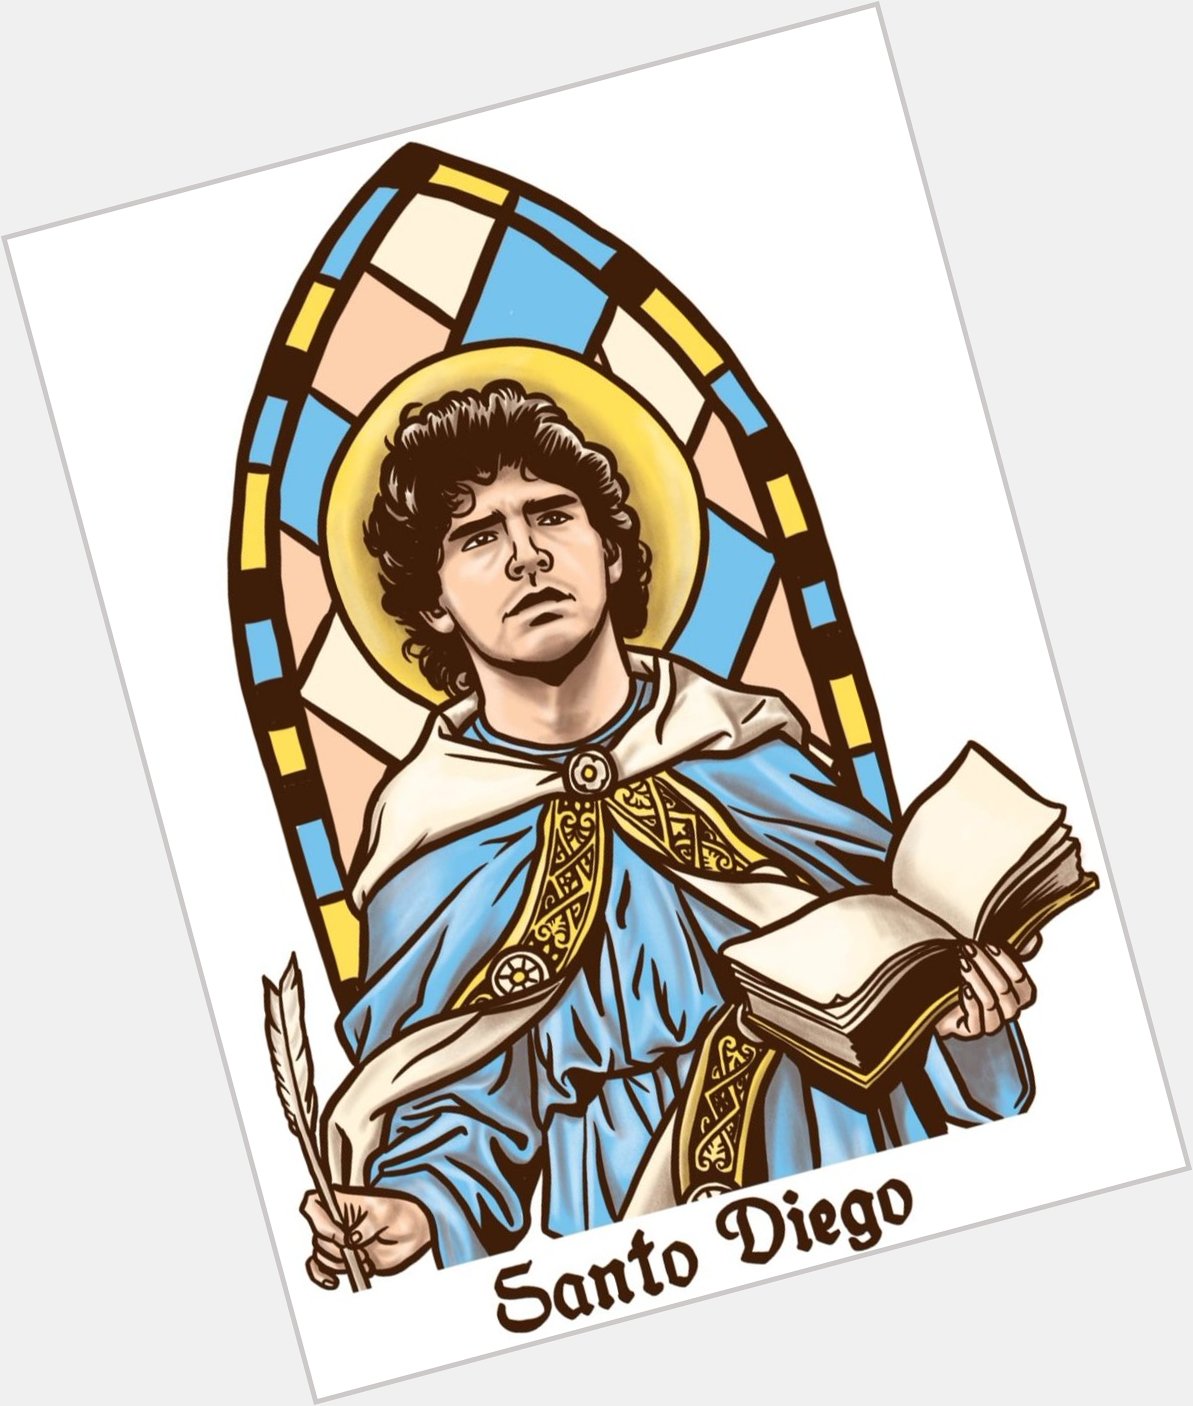 Happy Birthday to Diego Maradona. 

And don\t worry, more Santo Diego candles are in the way soon. 